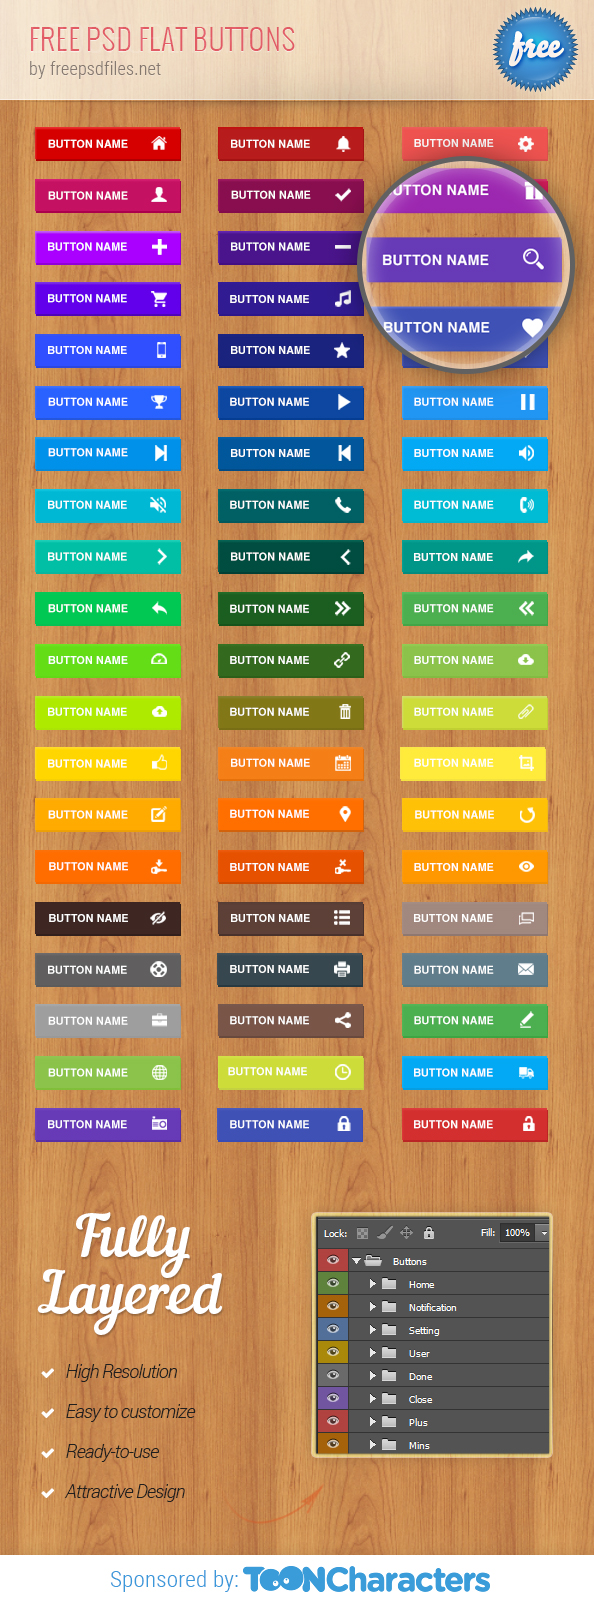 Free Flat Buttons Pack